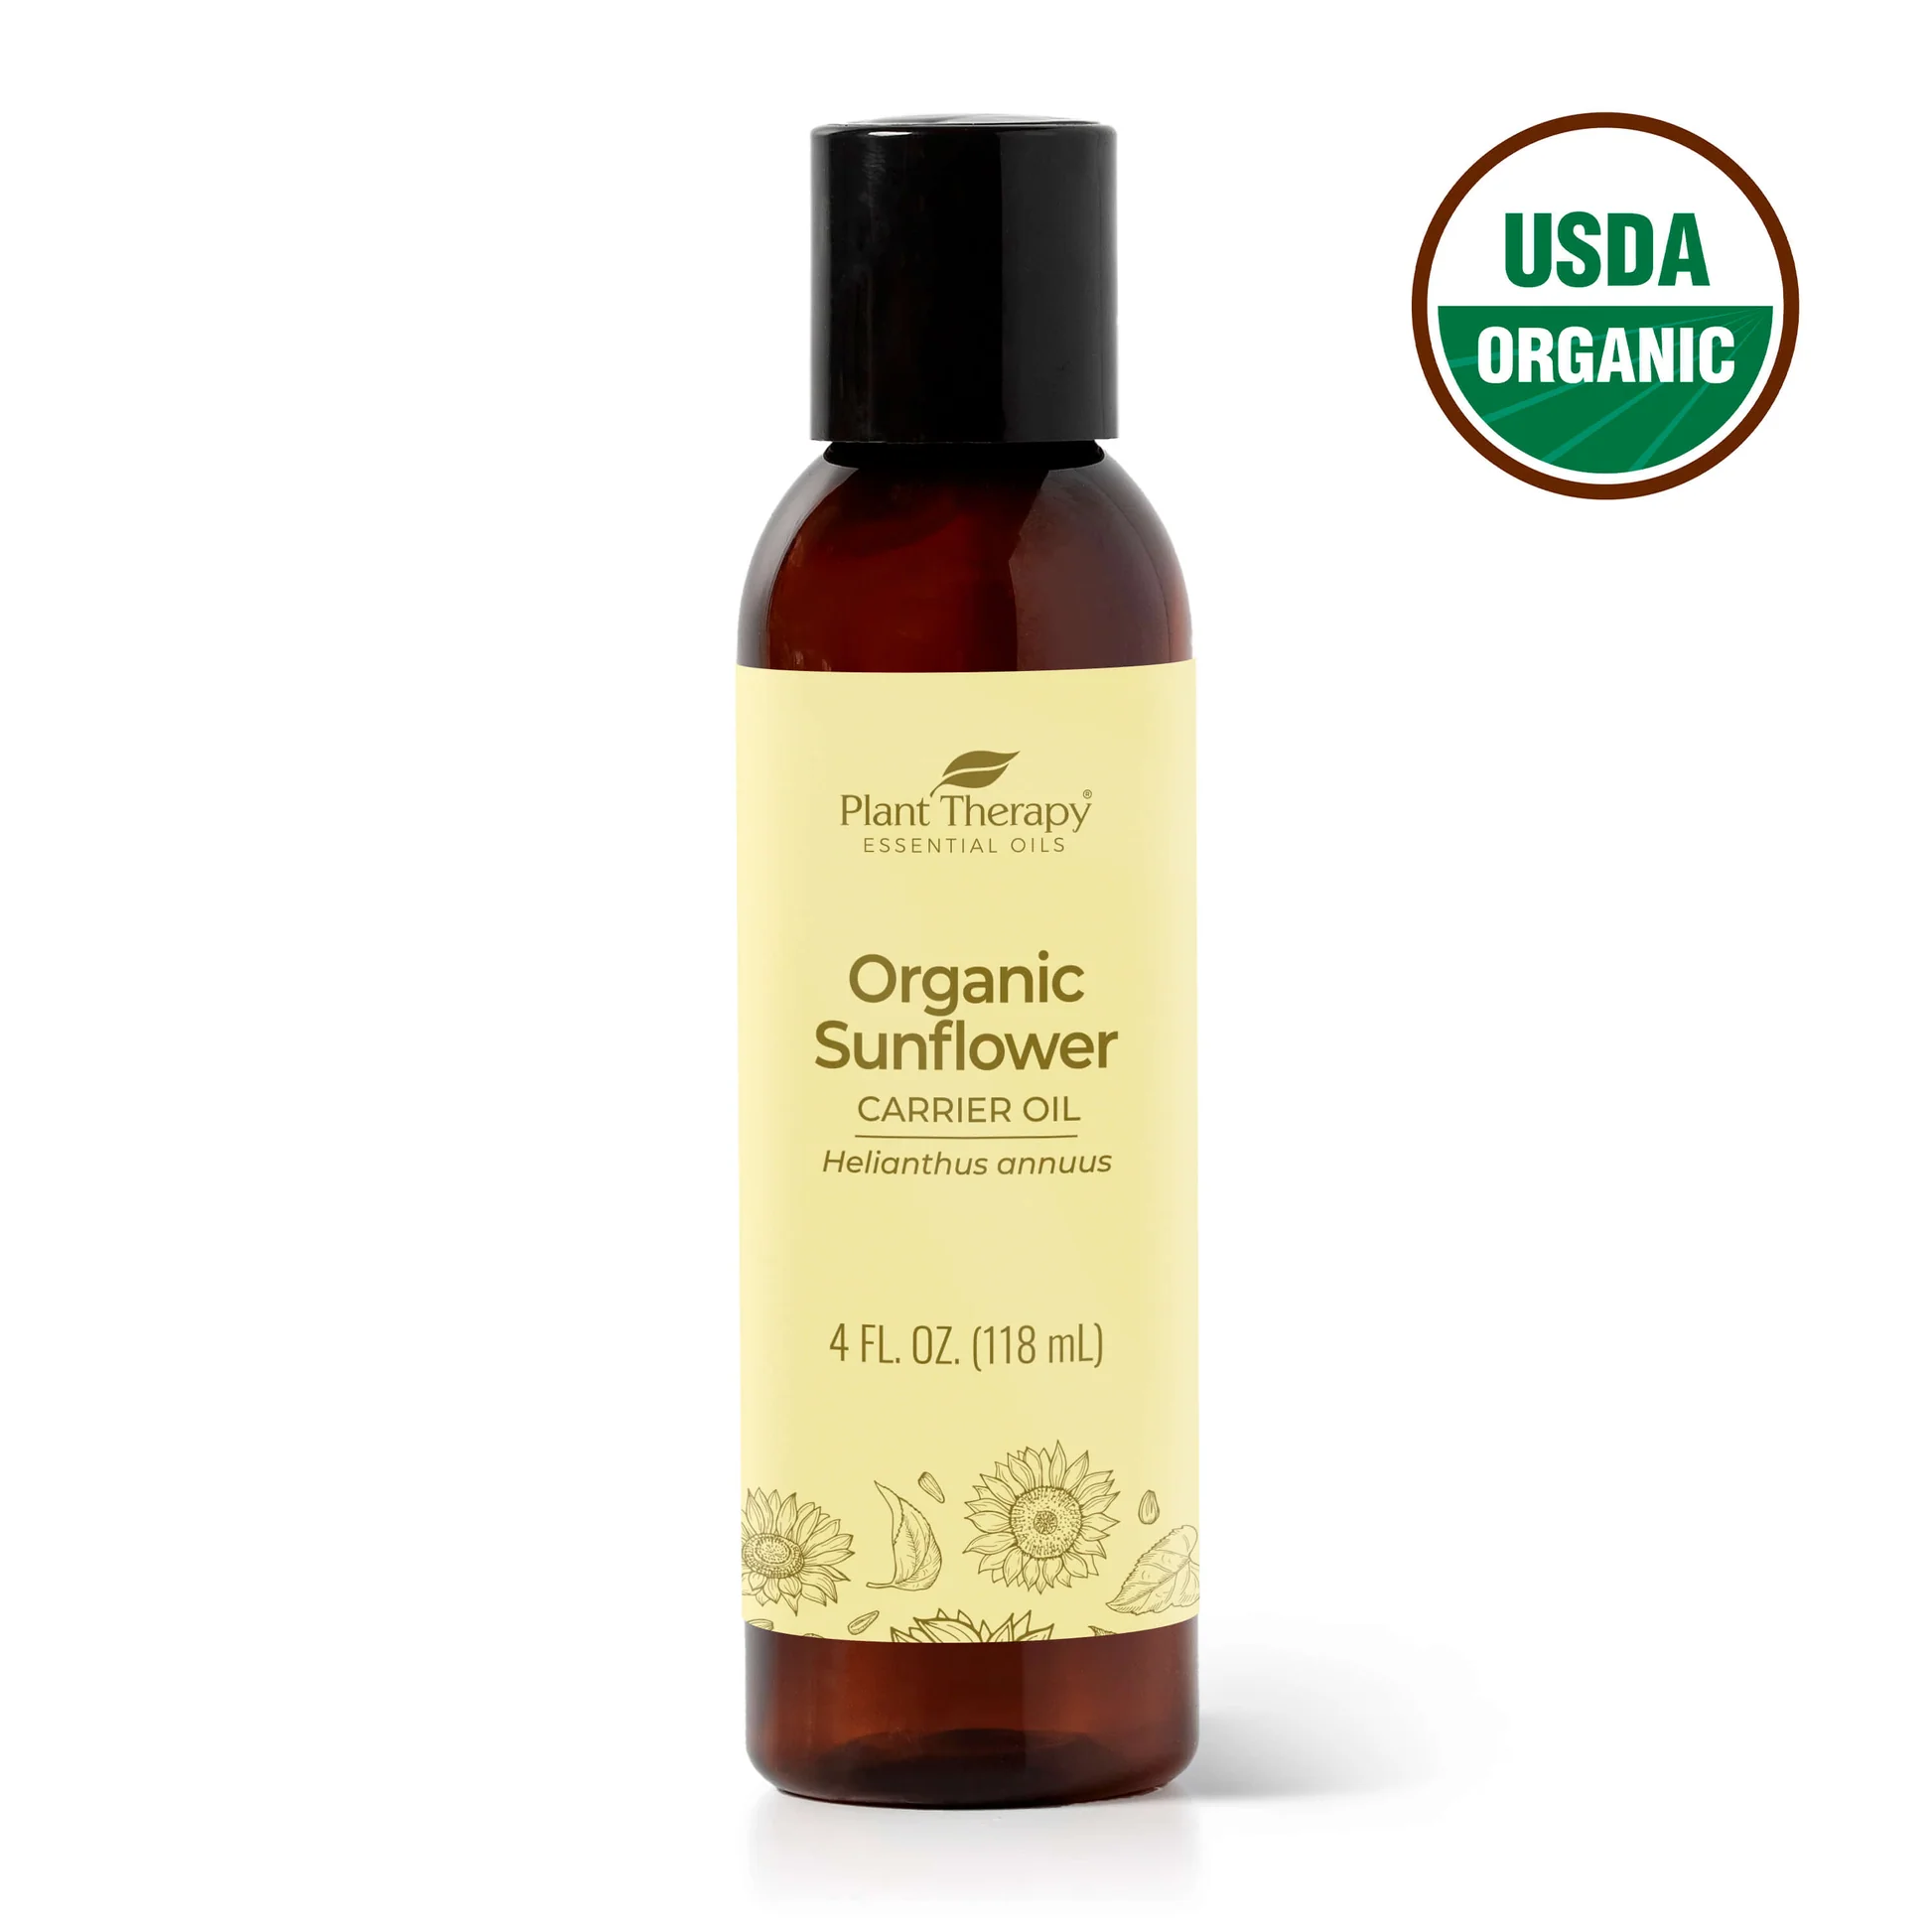 Plant Therapy Organic Sunflower Carrier Oil